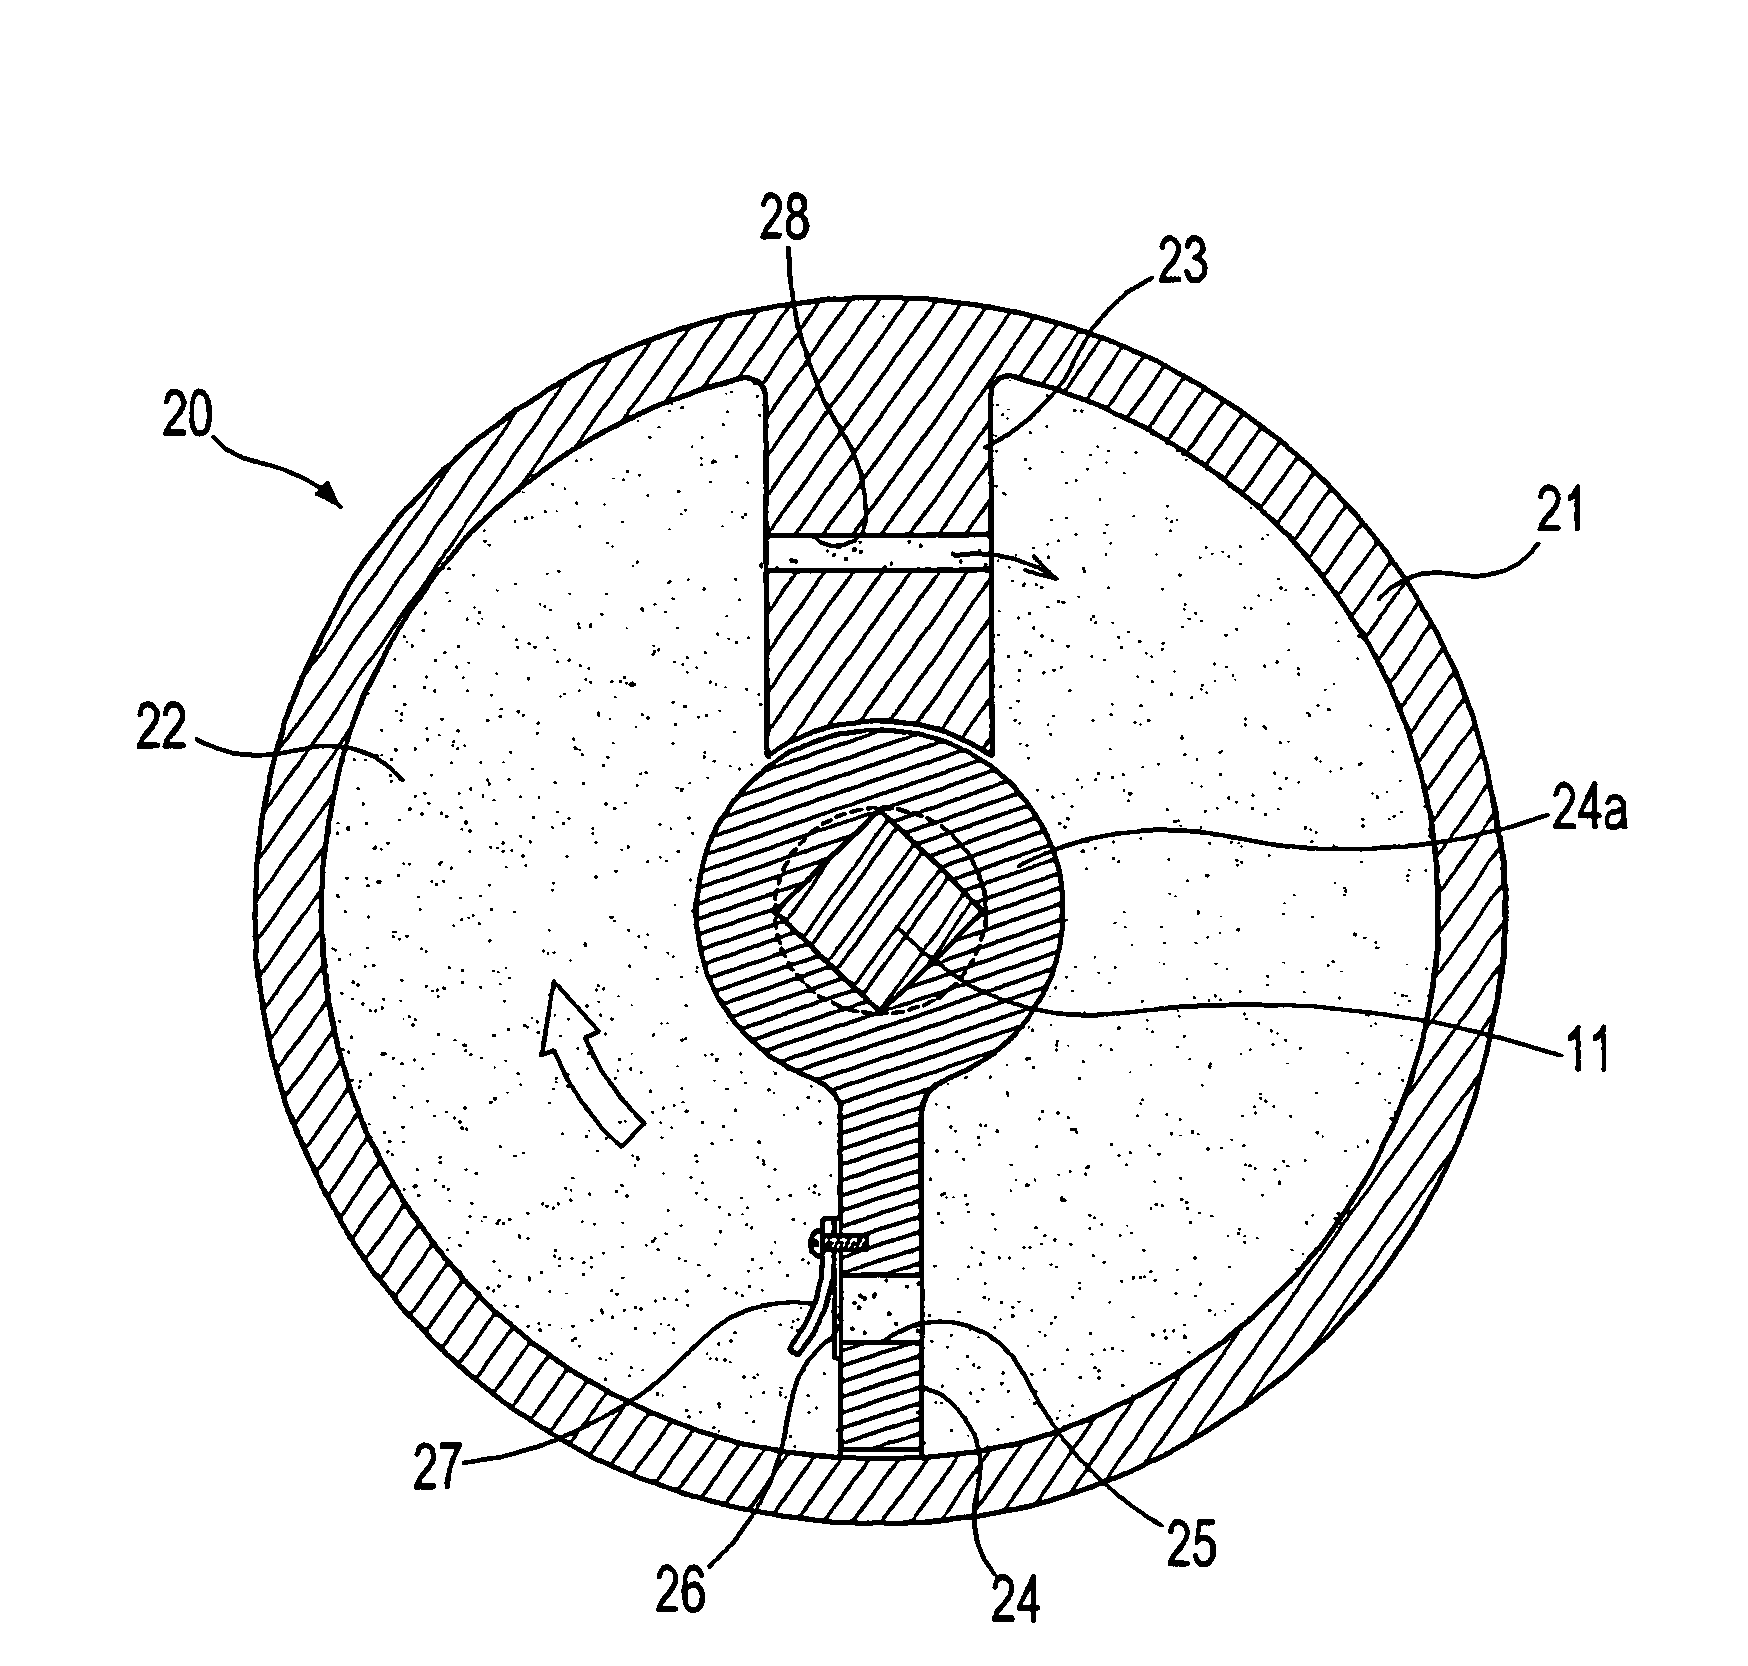 Door damper and electronic appliances having the same